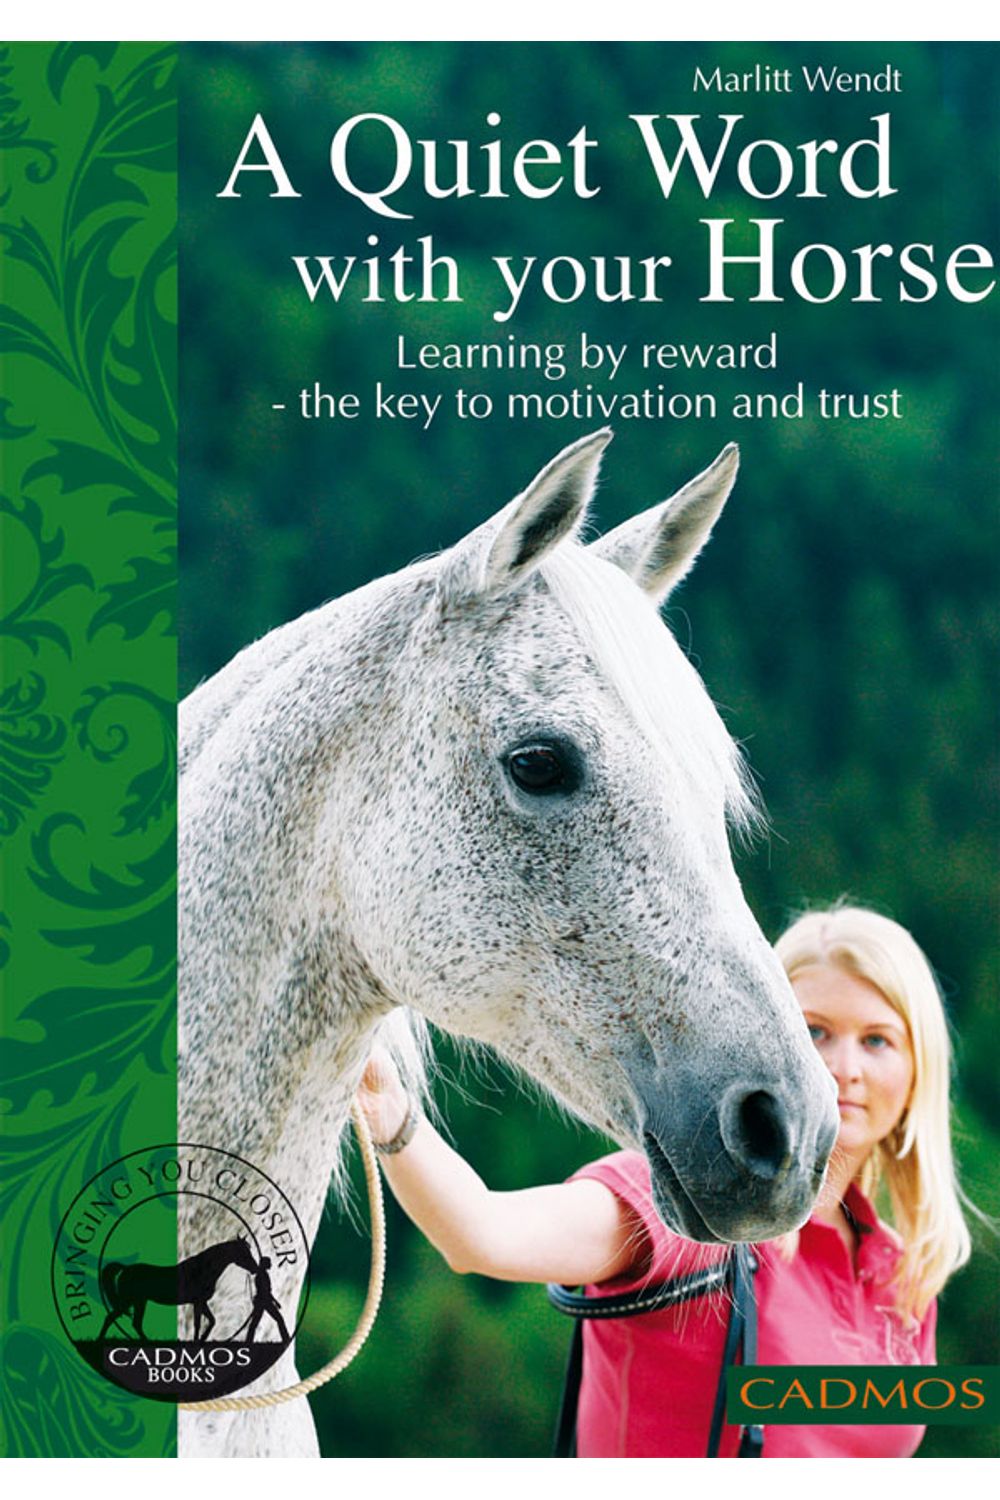 bw-a-quiet-word-with-your-horse-cadmos-publishing-9780857887283